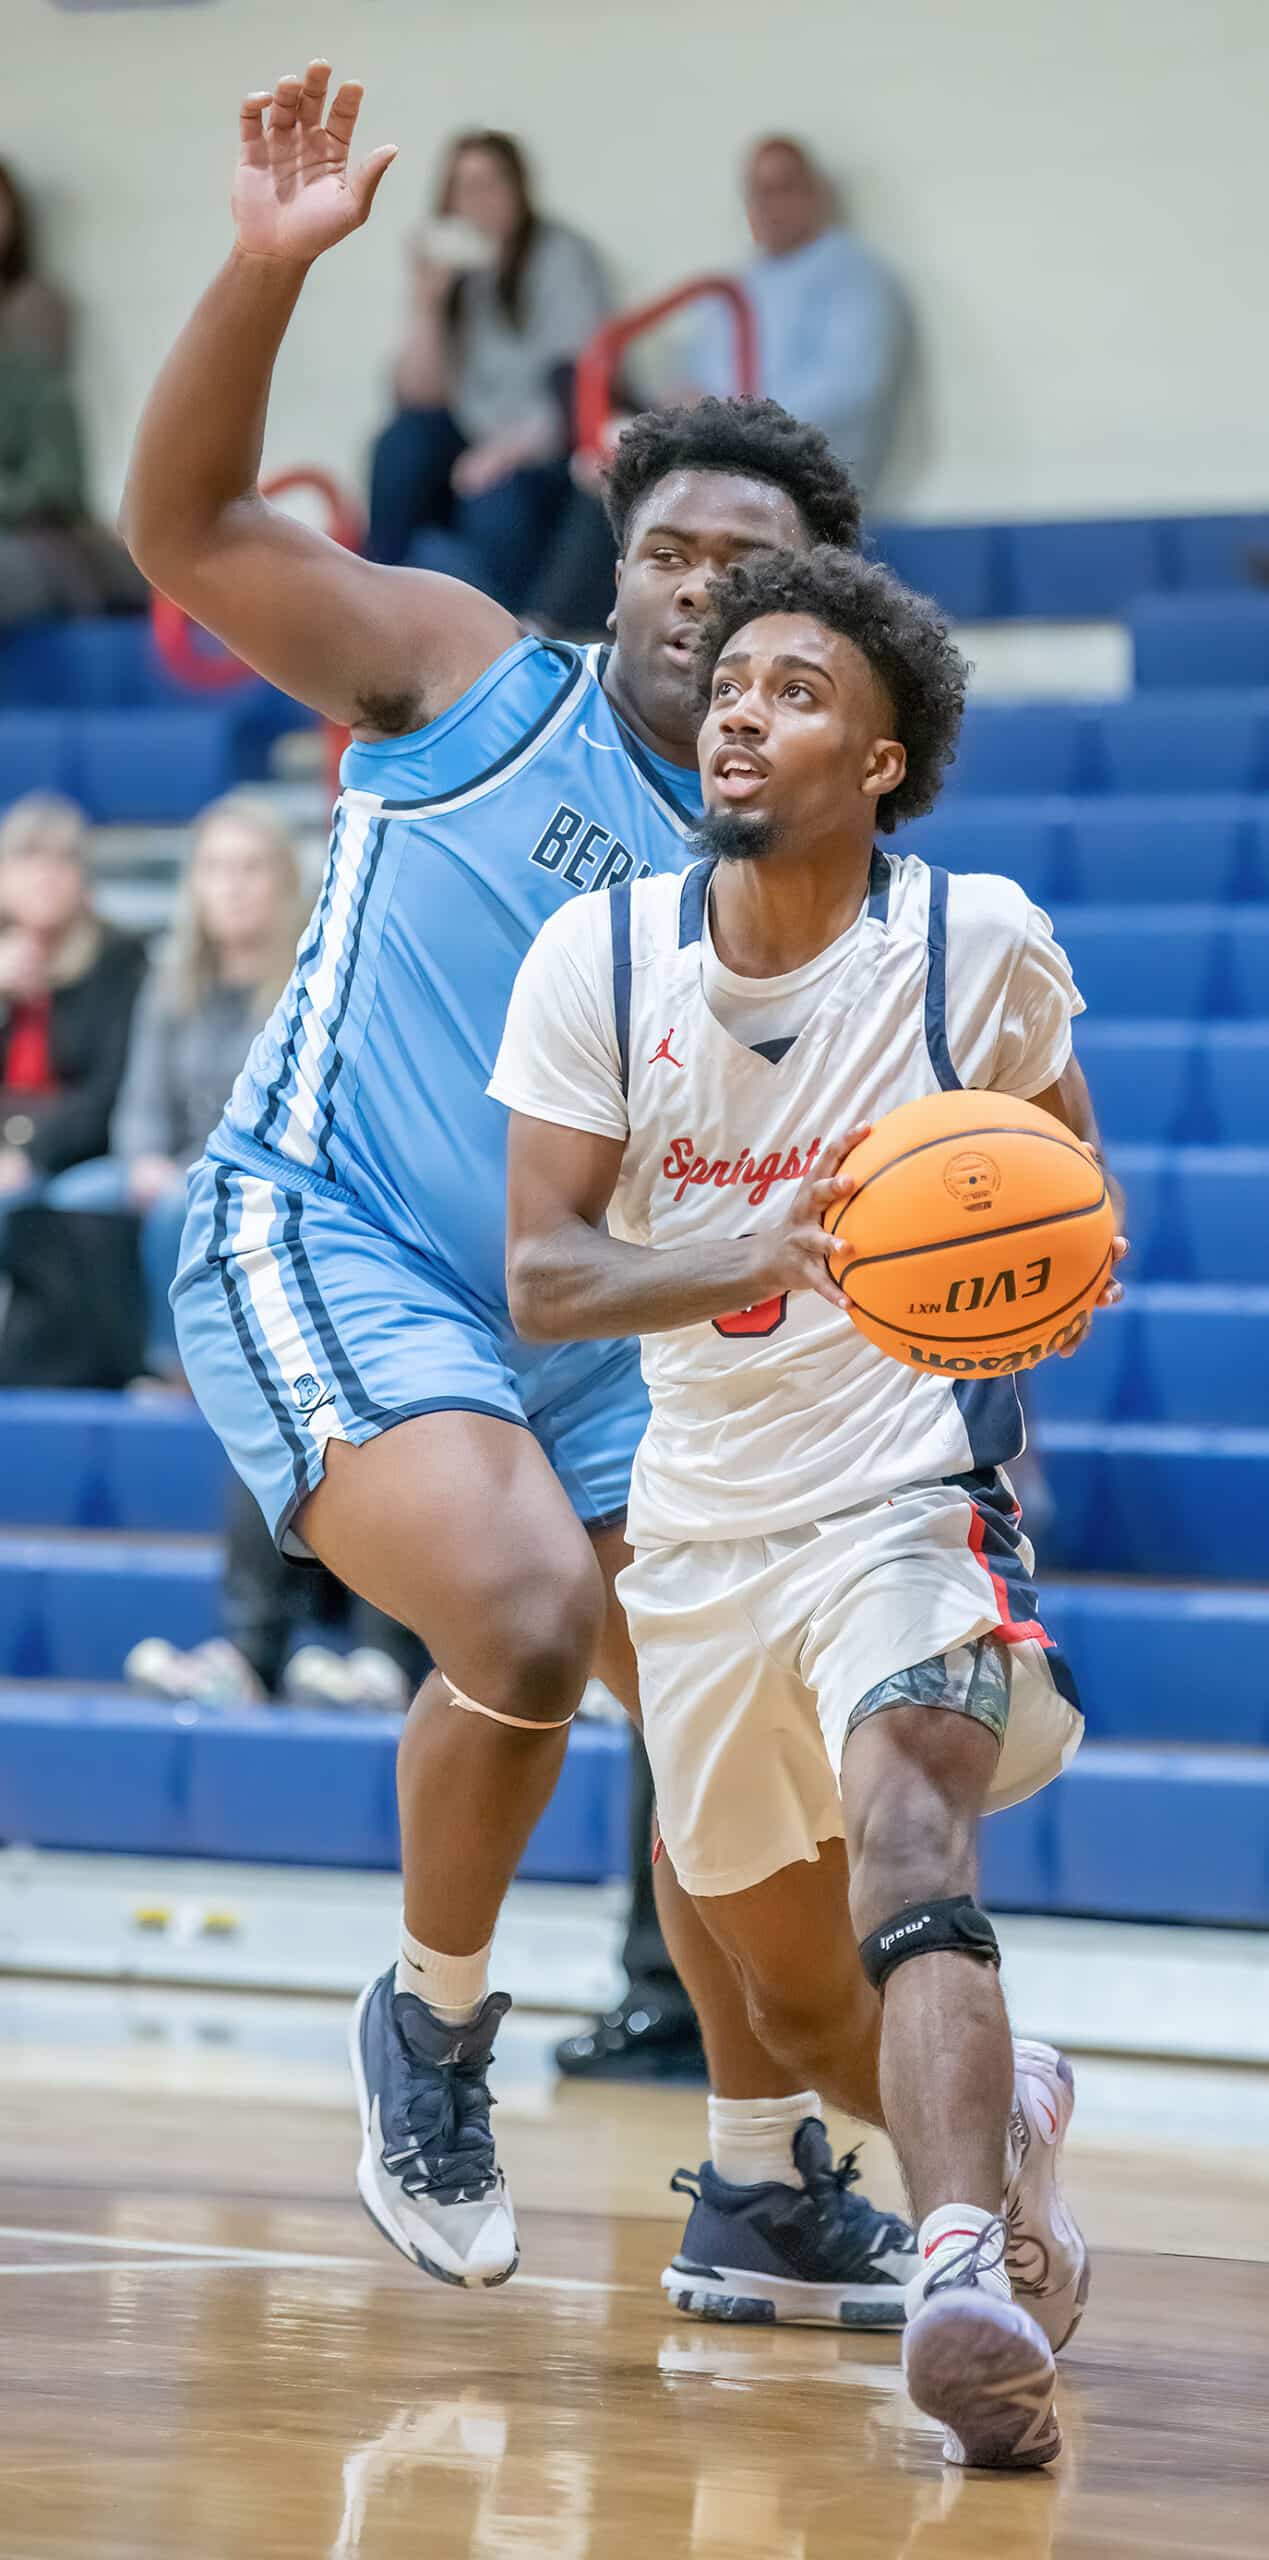 Springstead High, 3, Divine Torain, eyes the basket while guarded by by Berkely Prep ,11, Nikhil Jefferson Wednesday in the 8th Annual Greg O’Connell Shootout at Springstead High. Photo by JOE DiCRISTOFALO